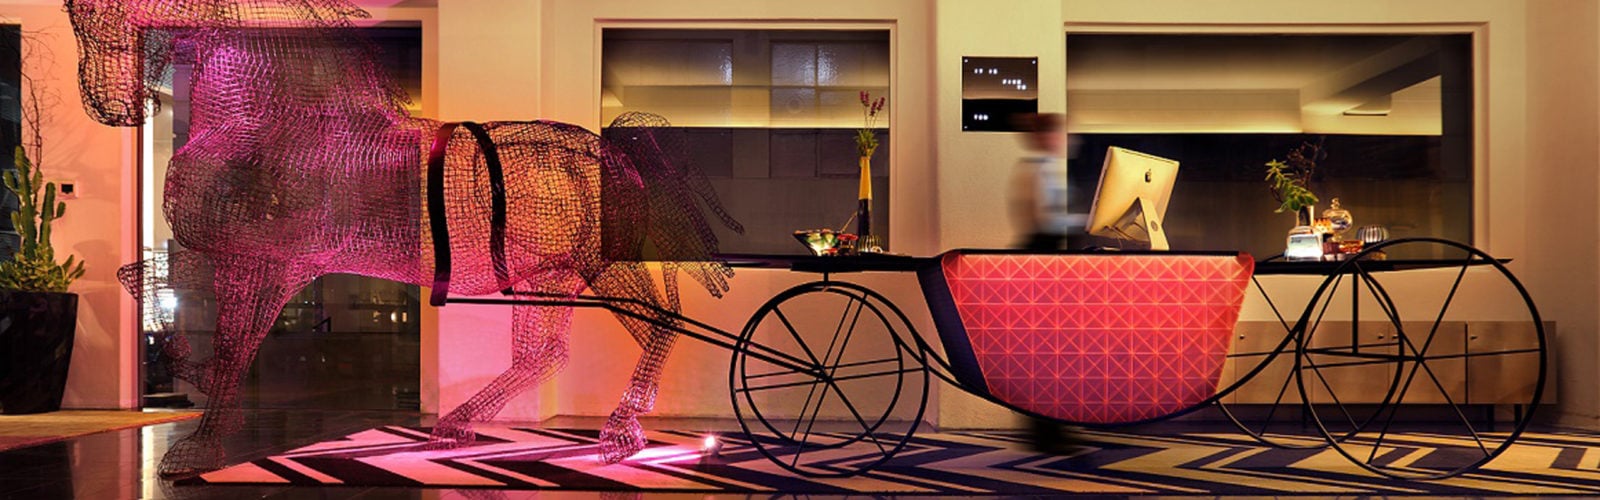 adelphi-hotel-horse-and-carriage